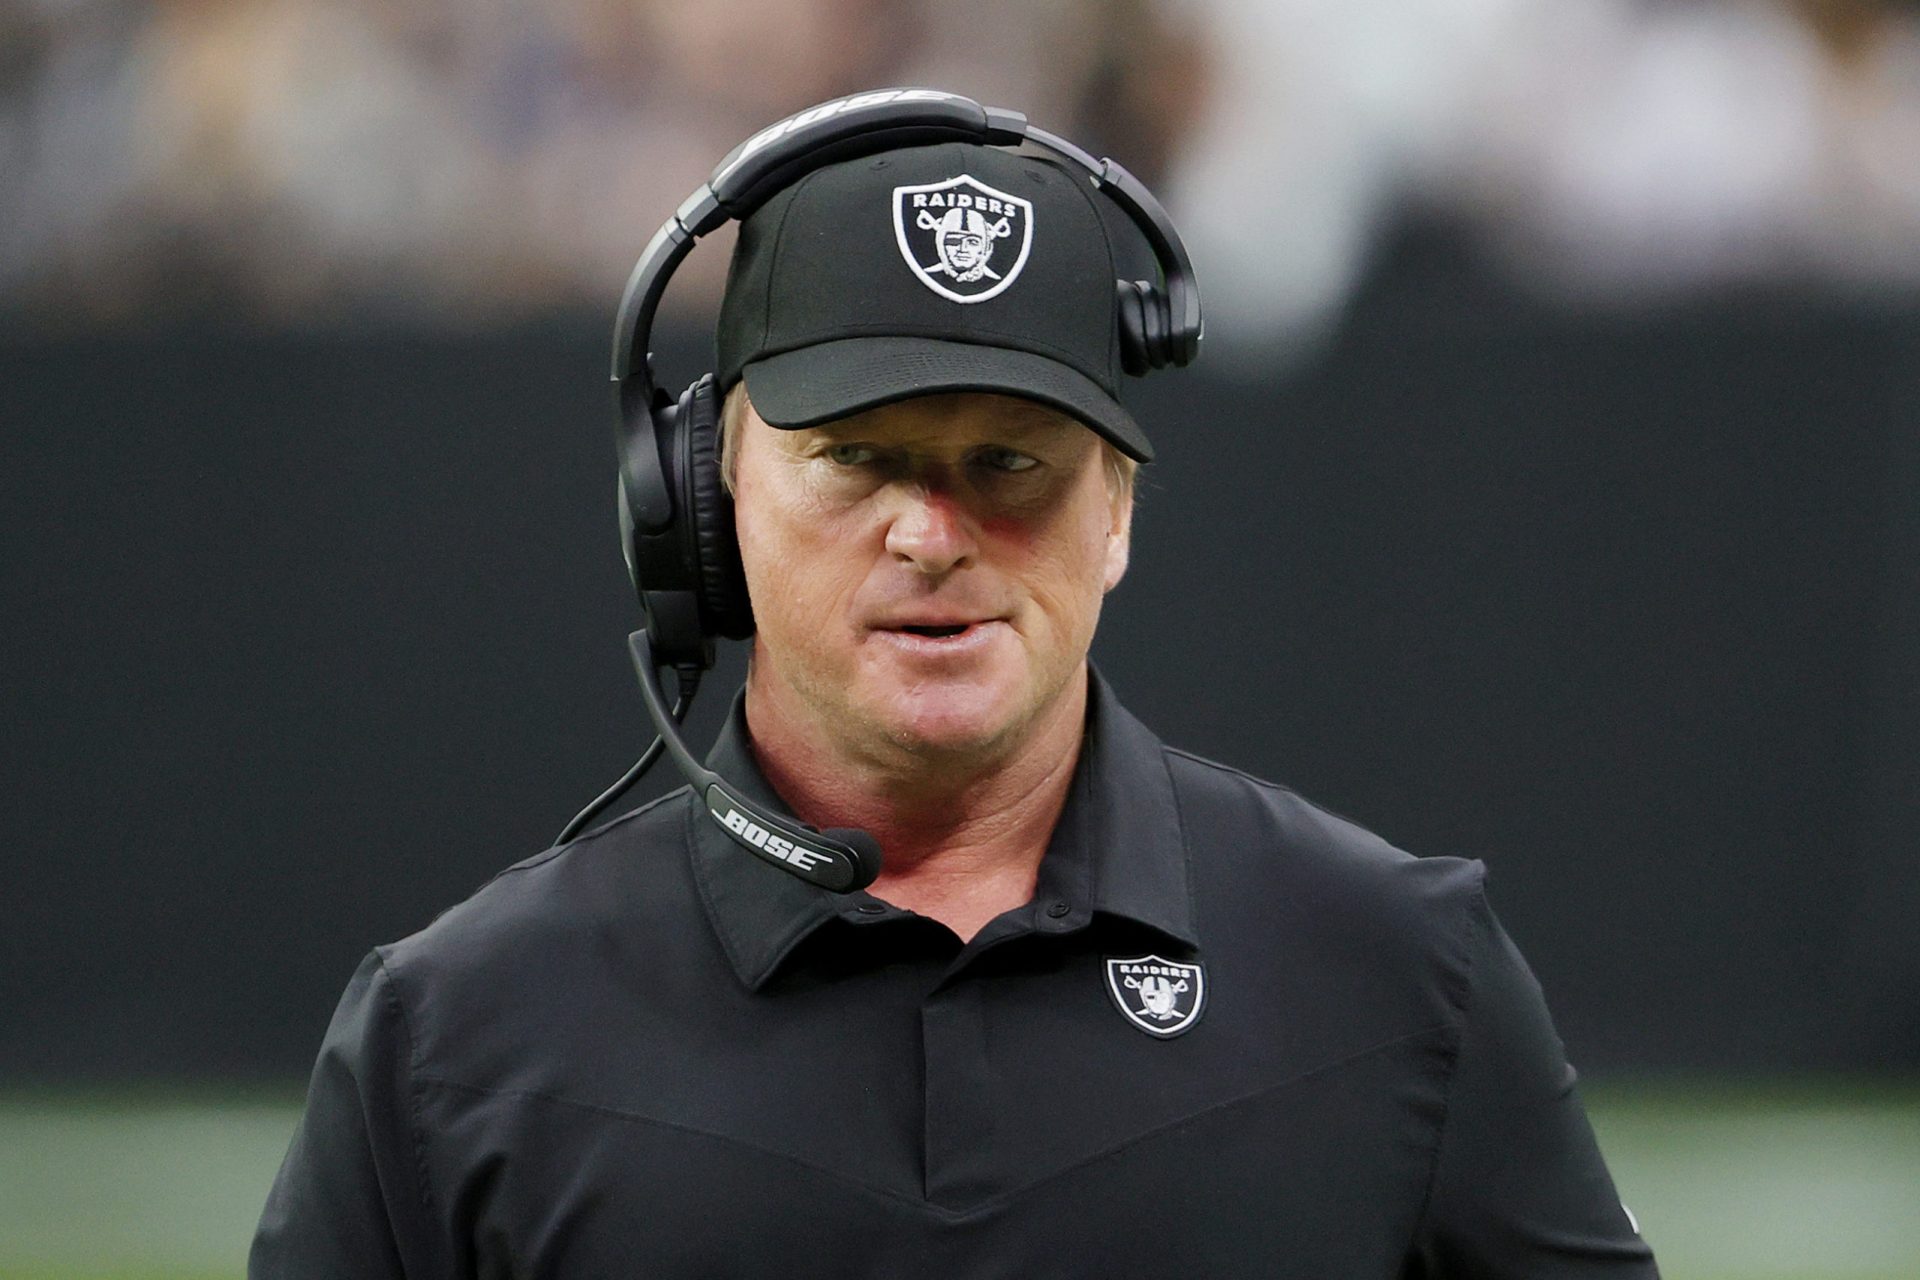 Jon Gruden Resigns As Raiders Head Coach After Alleged Racist & Anti-LGBTQ Emails Were Released